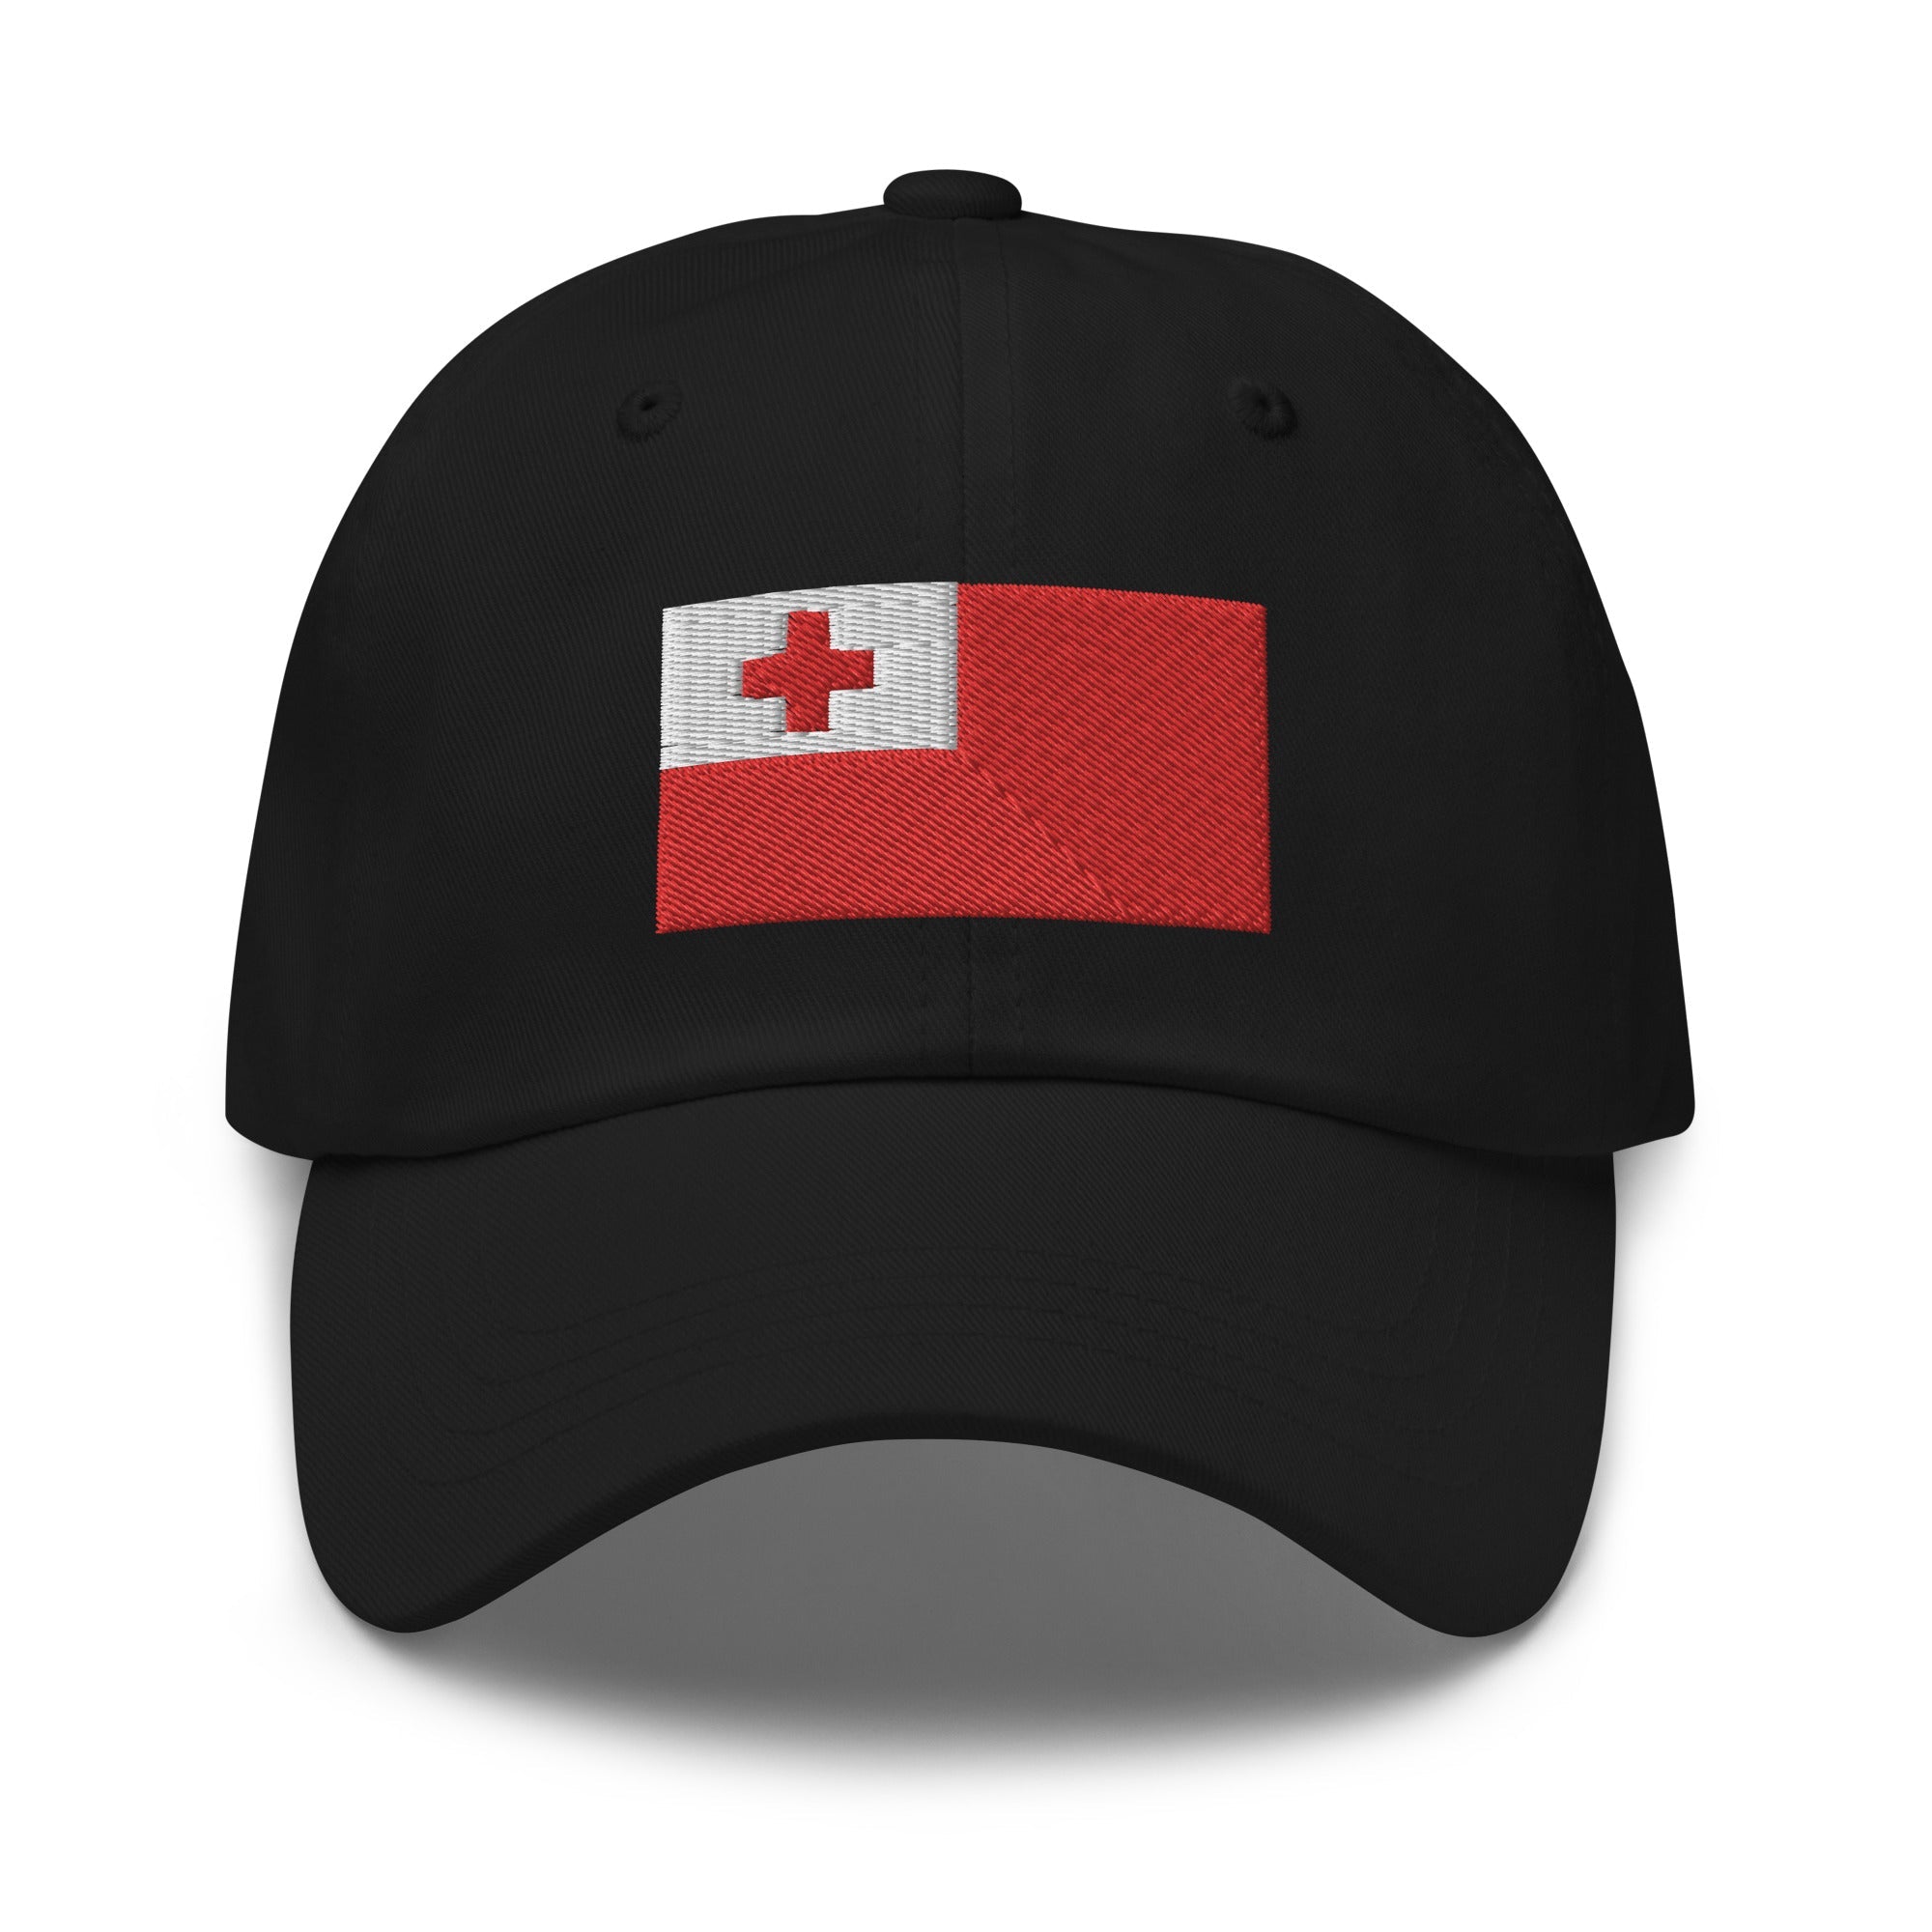 Tonga Flag Cap - Adjustable Embroidered Dad Hat